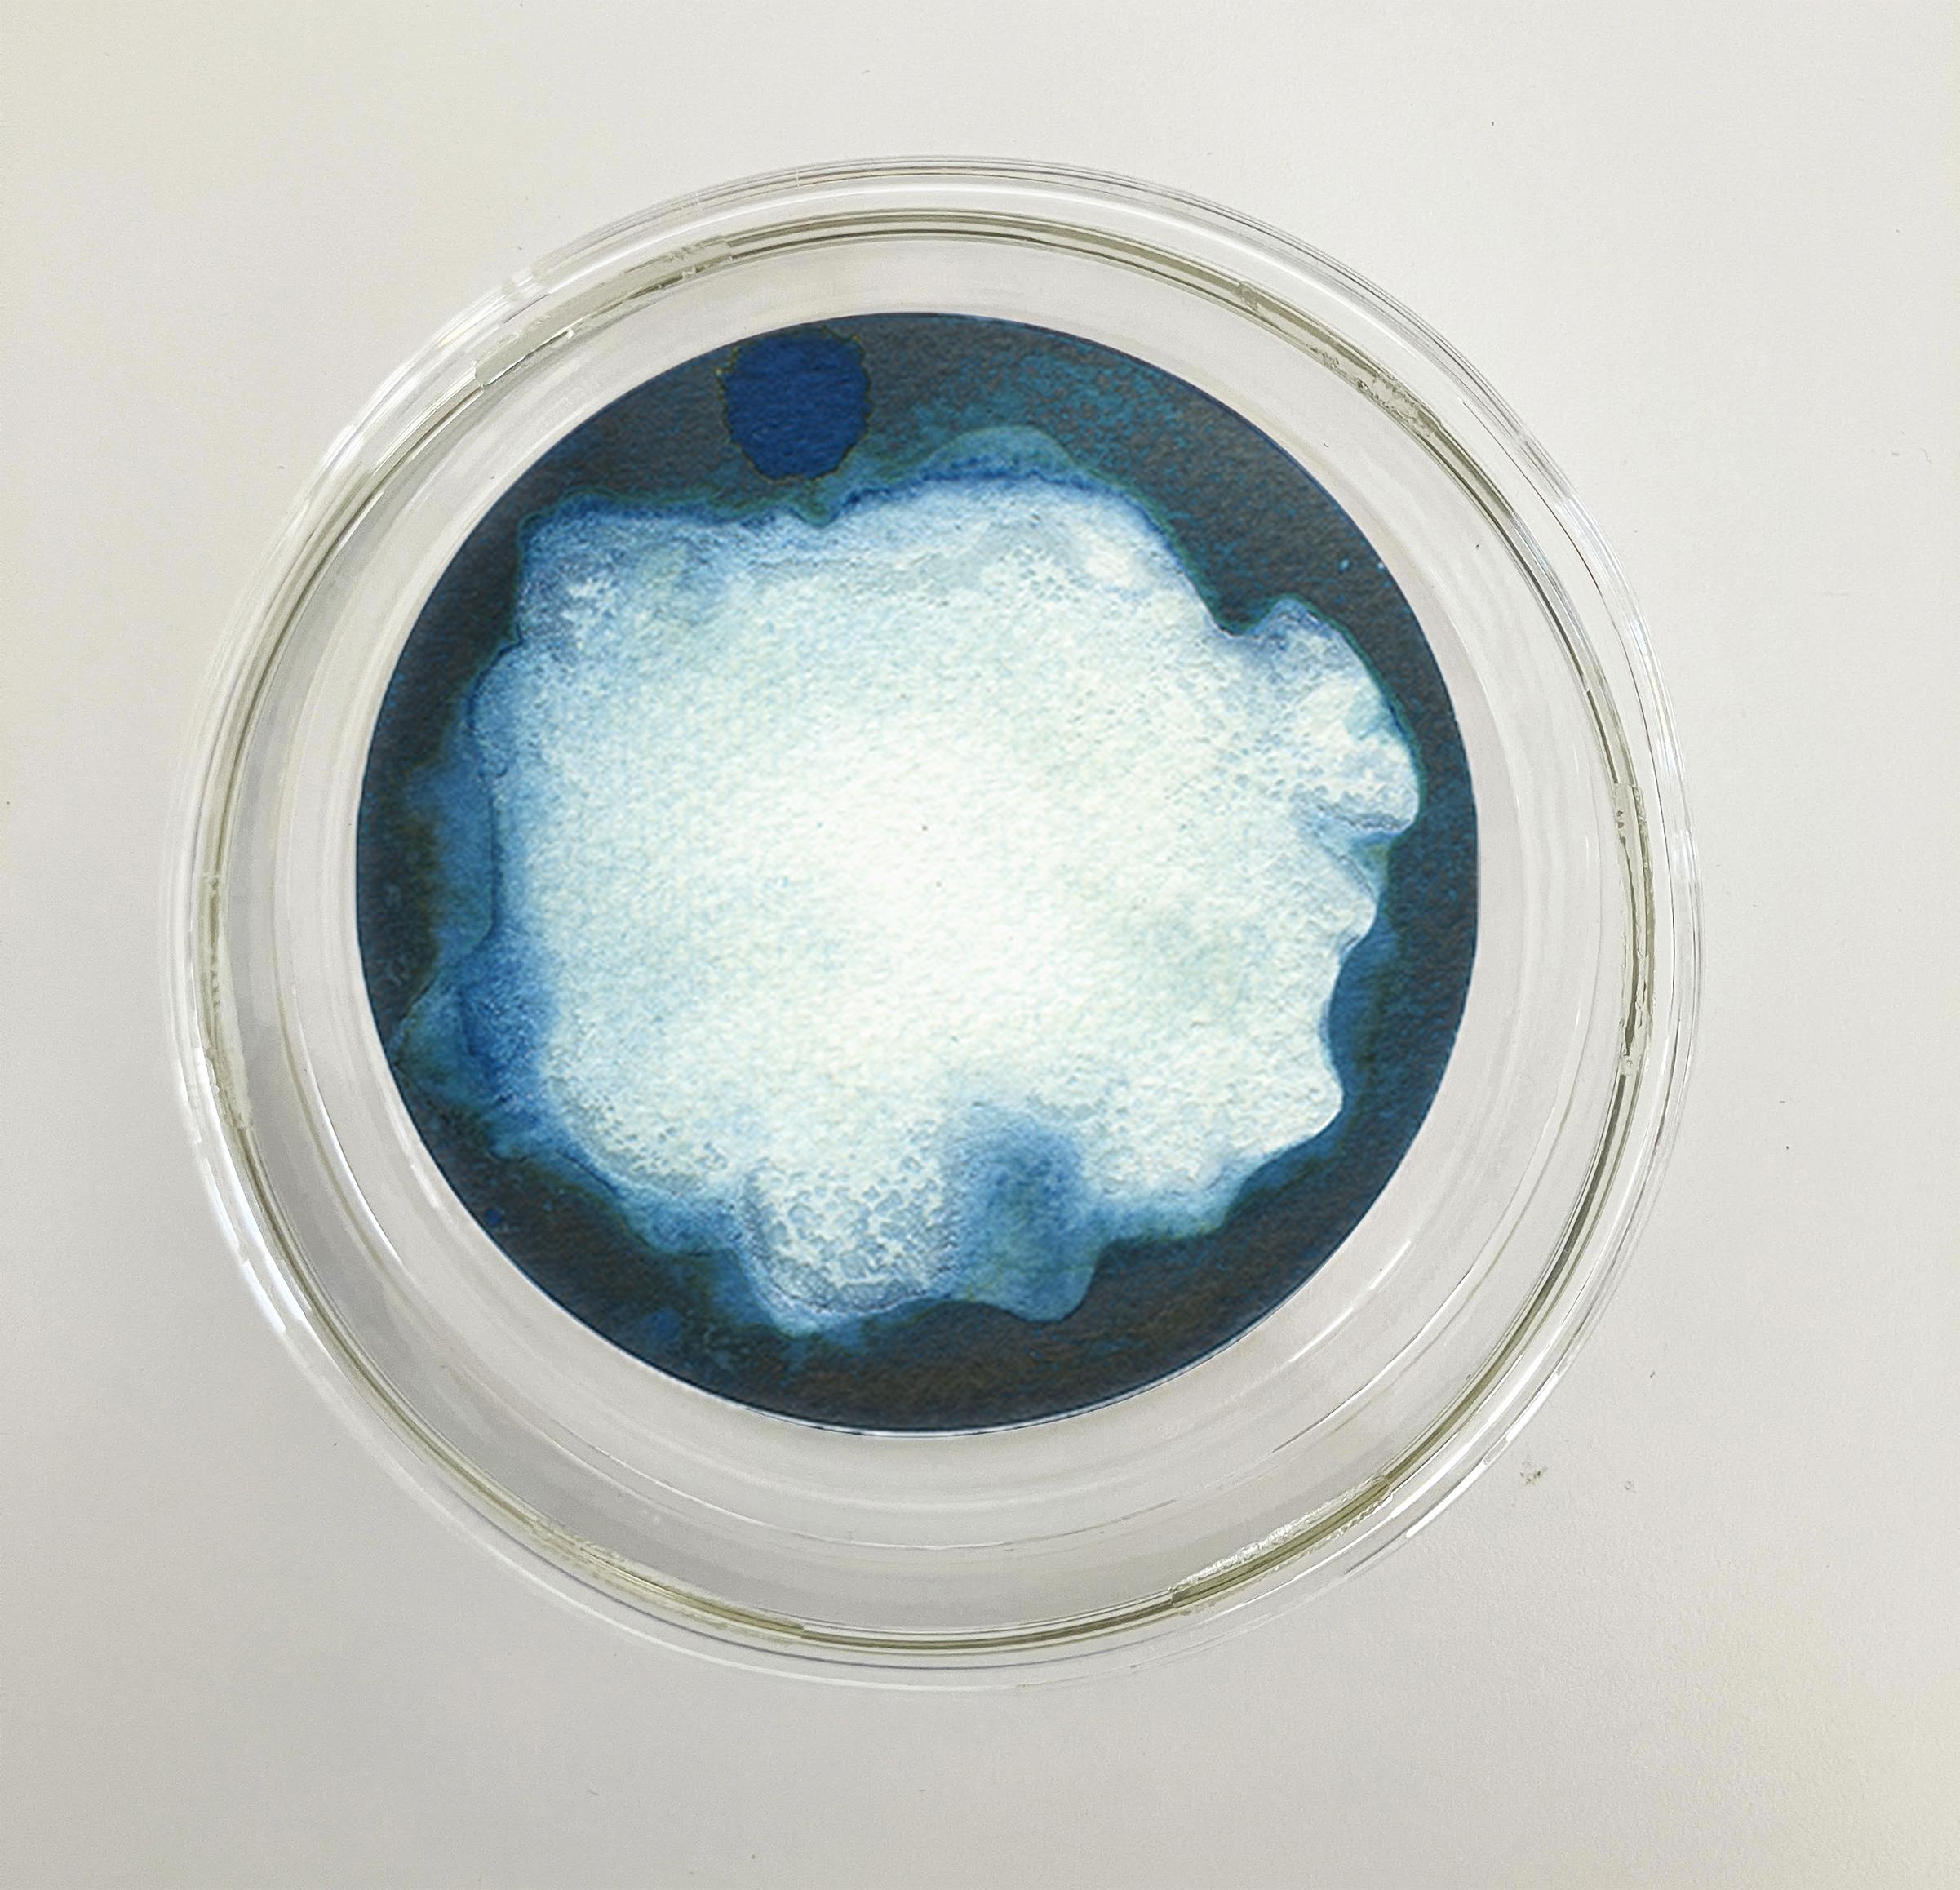 Sal 22, 23 y 24. Cyanotype photograhs mounted in high resistance glass dish - Sculpture by Paola Davila